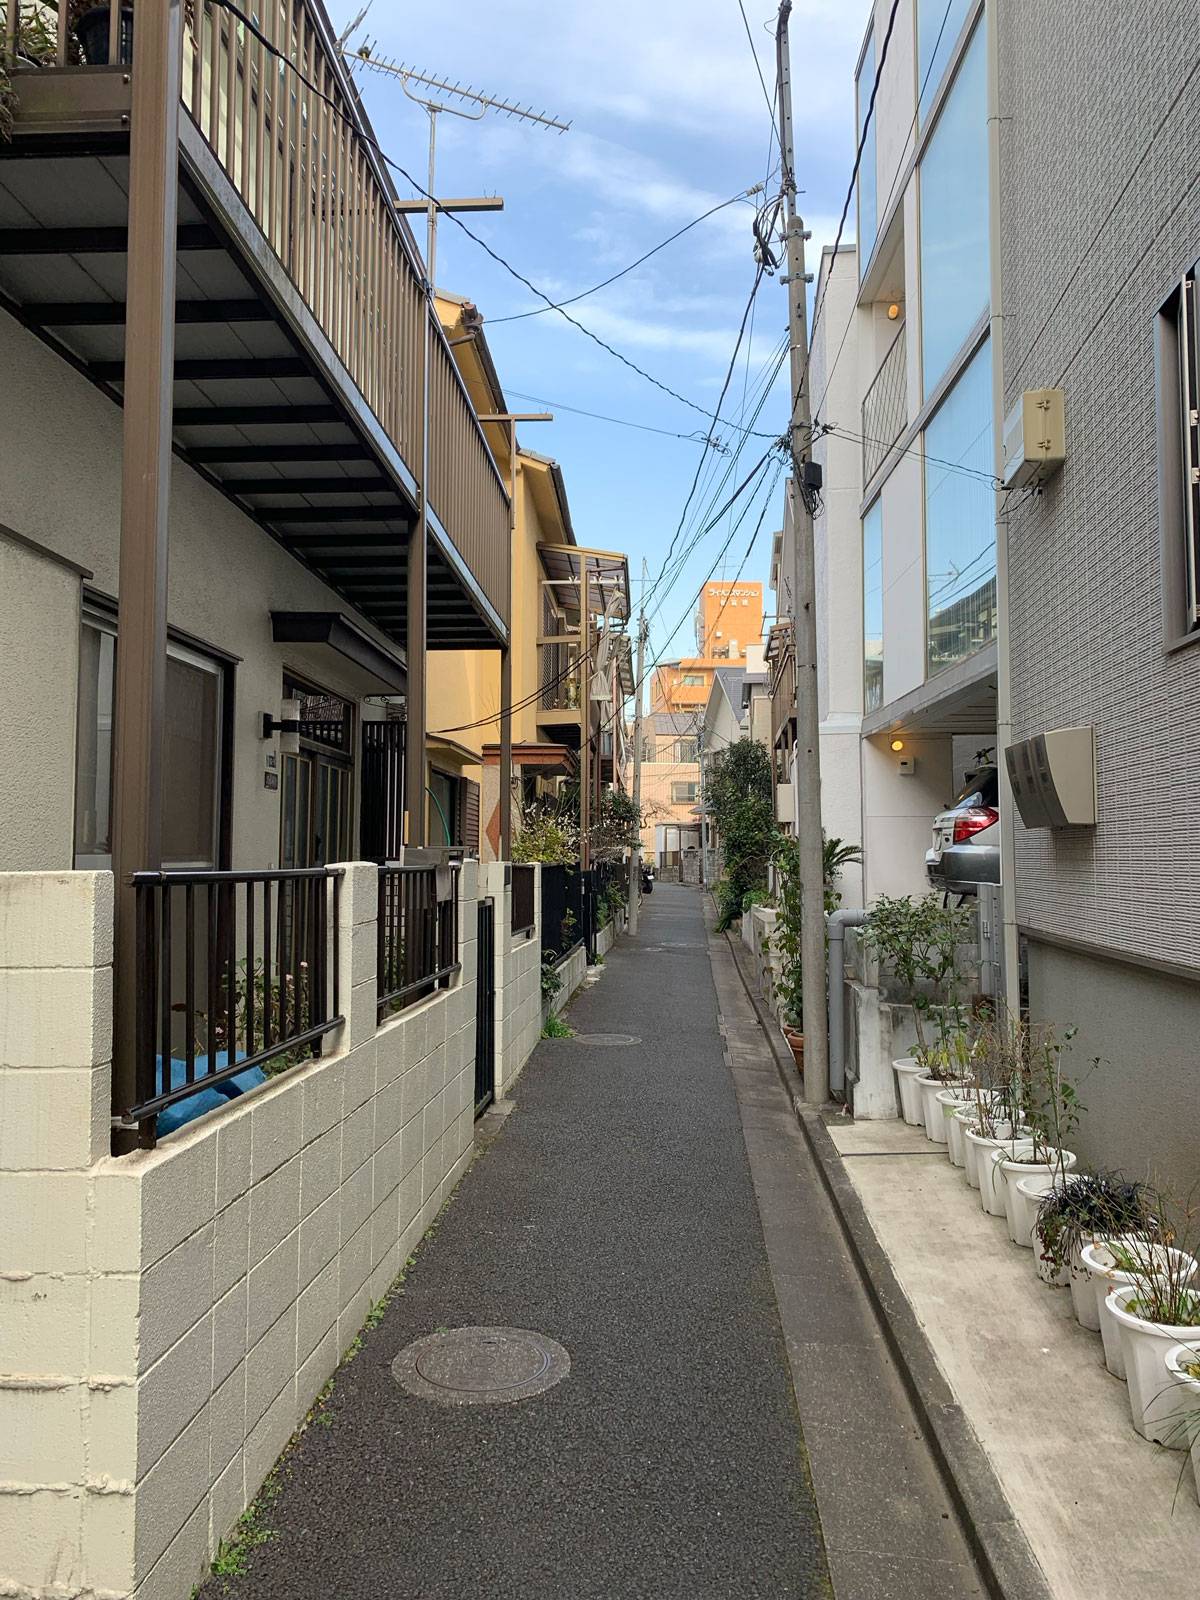 Narrow residential alley